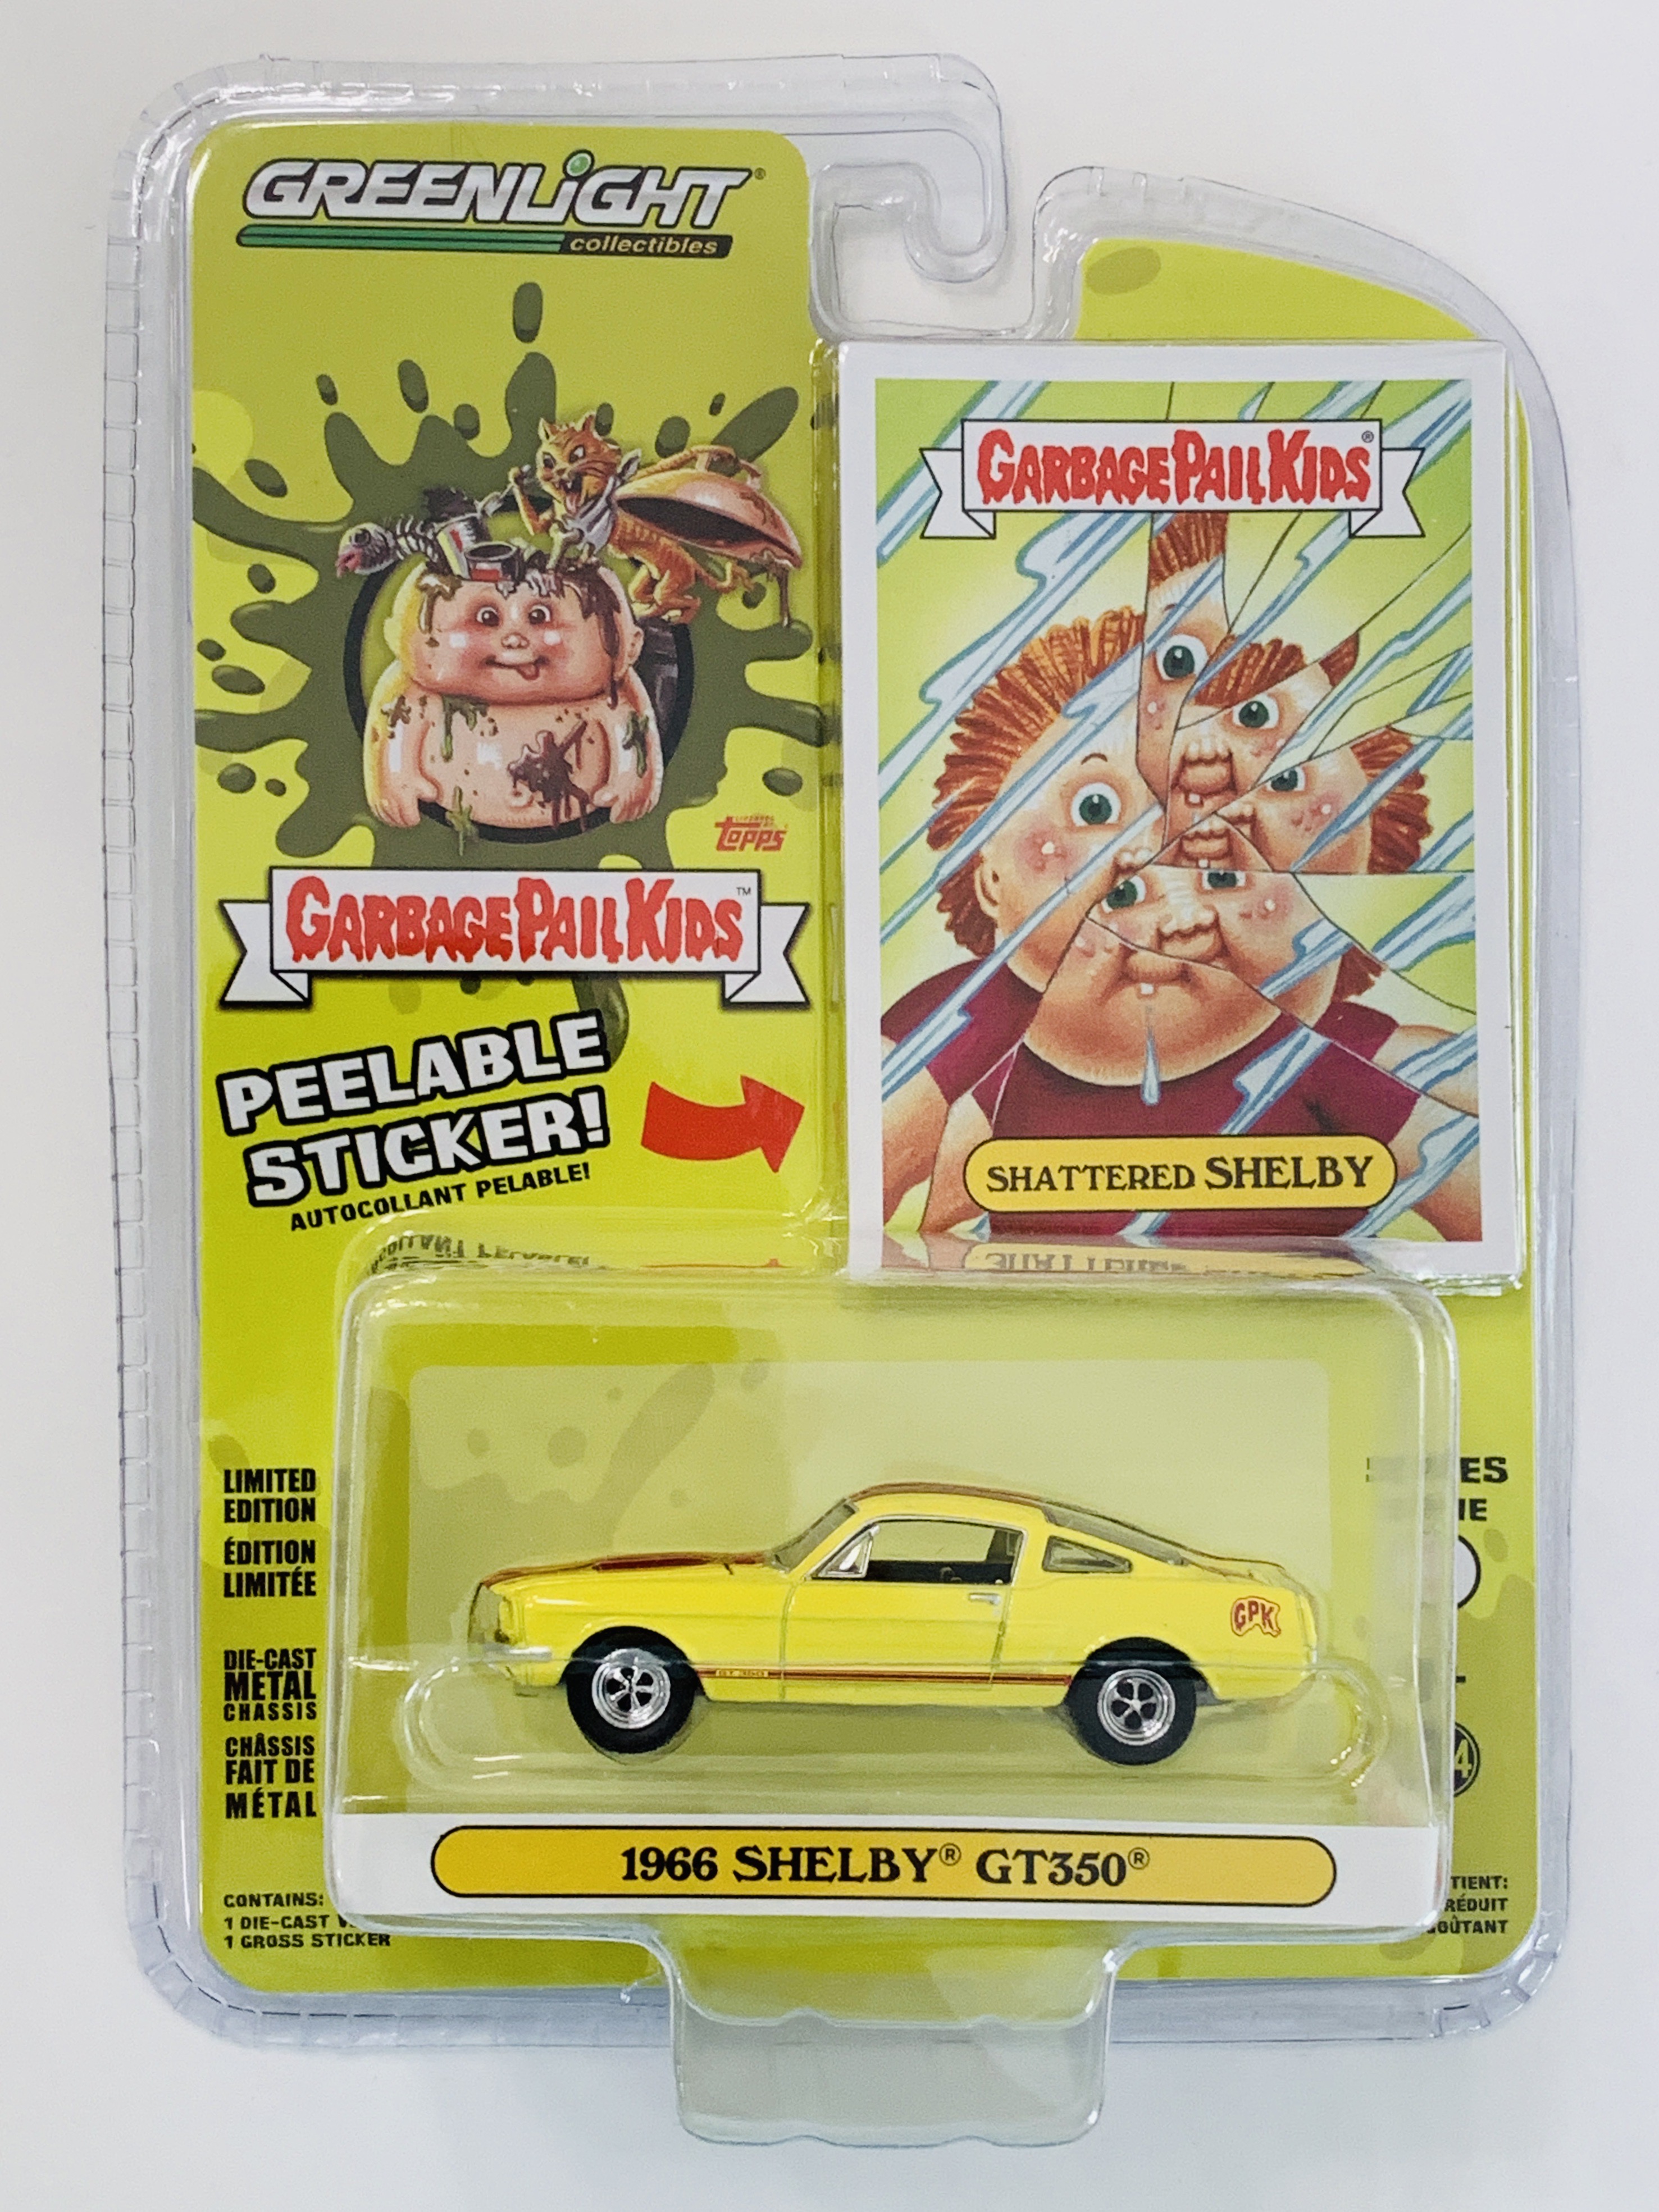 Greenlight Garbage Pail Kids Shattered Shelby 1966 Shelby GT350